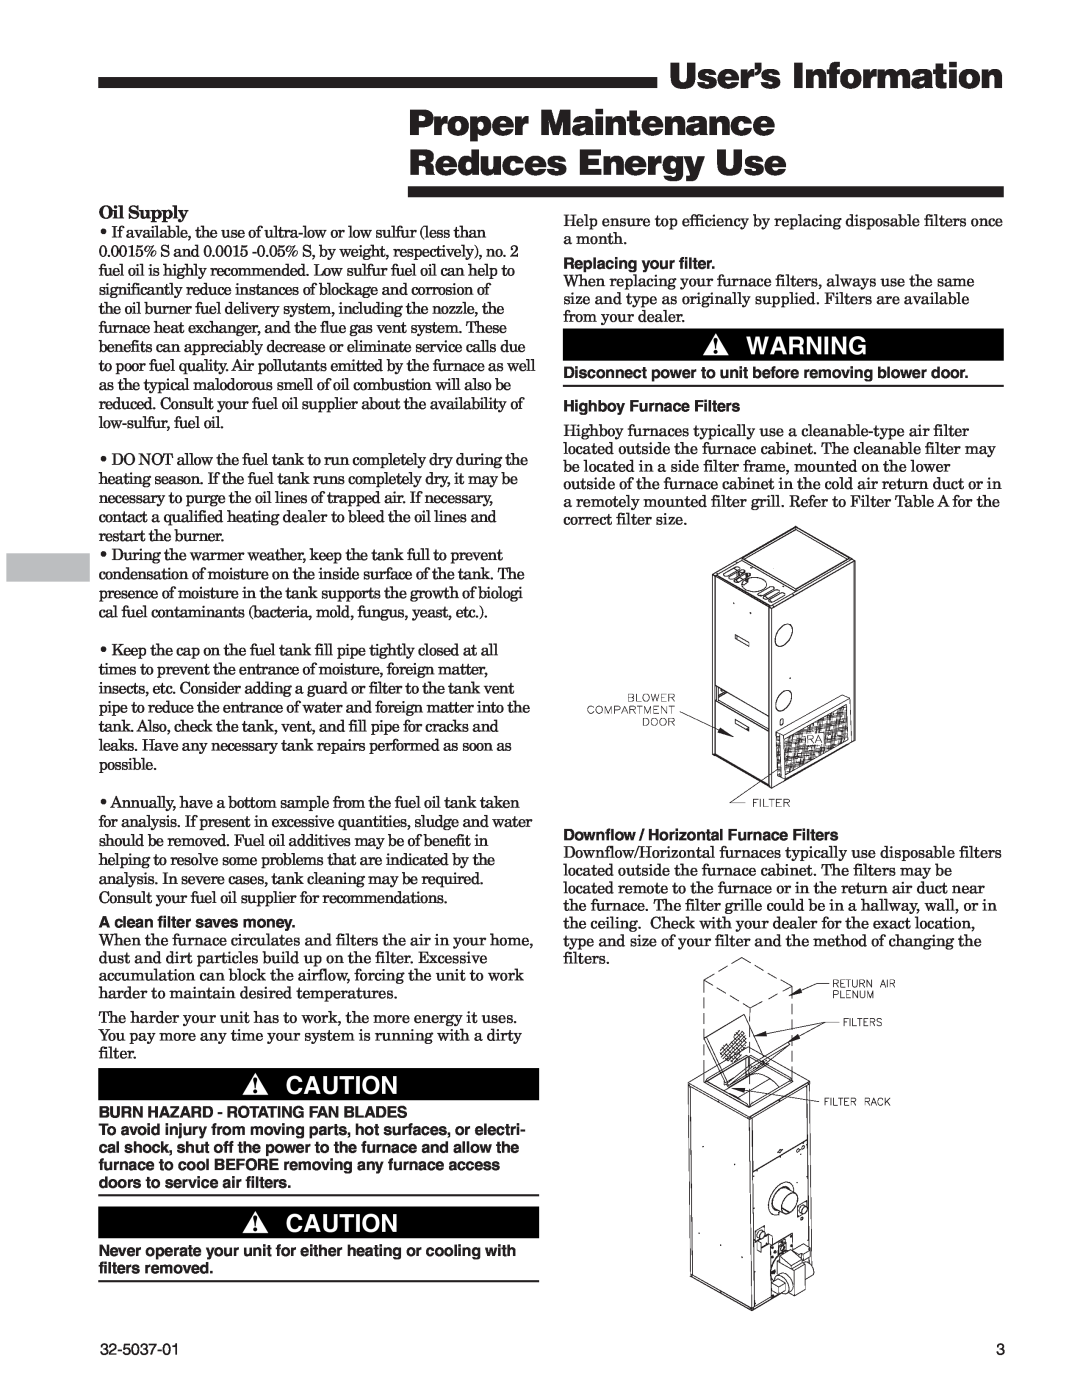 American Standard 32-5037-01 manual User’s Information Proper Maintenance, Reduces Energy Use, Oil Supply 